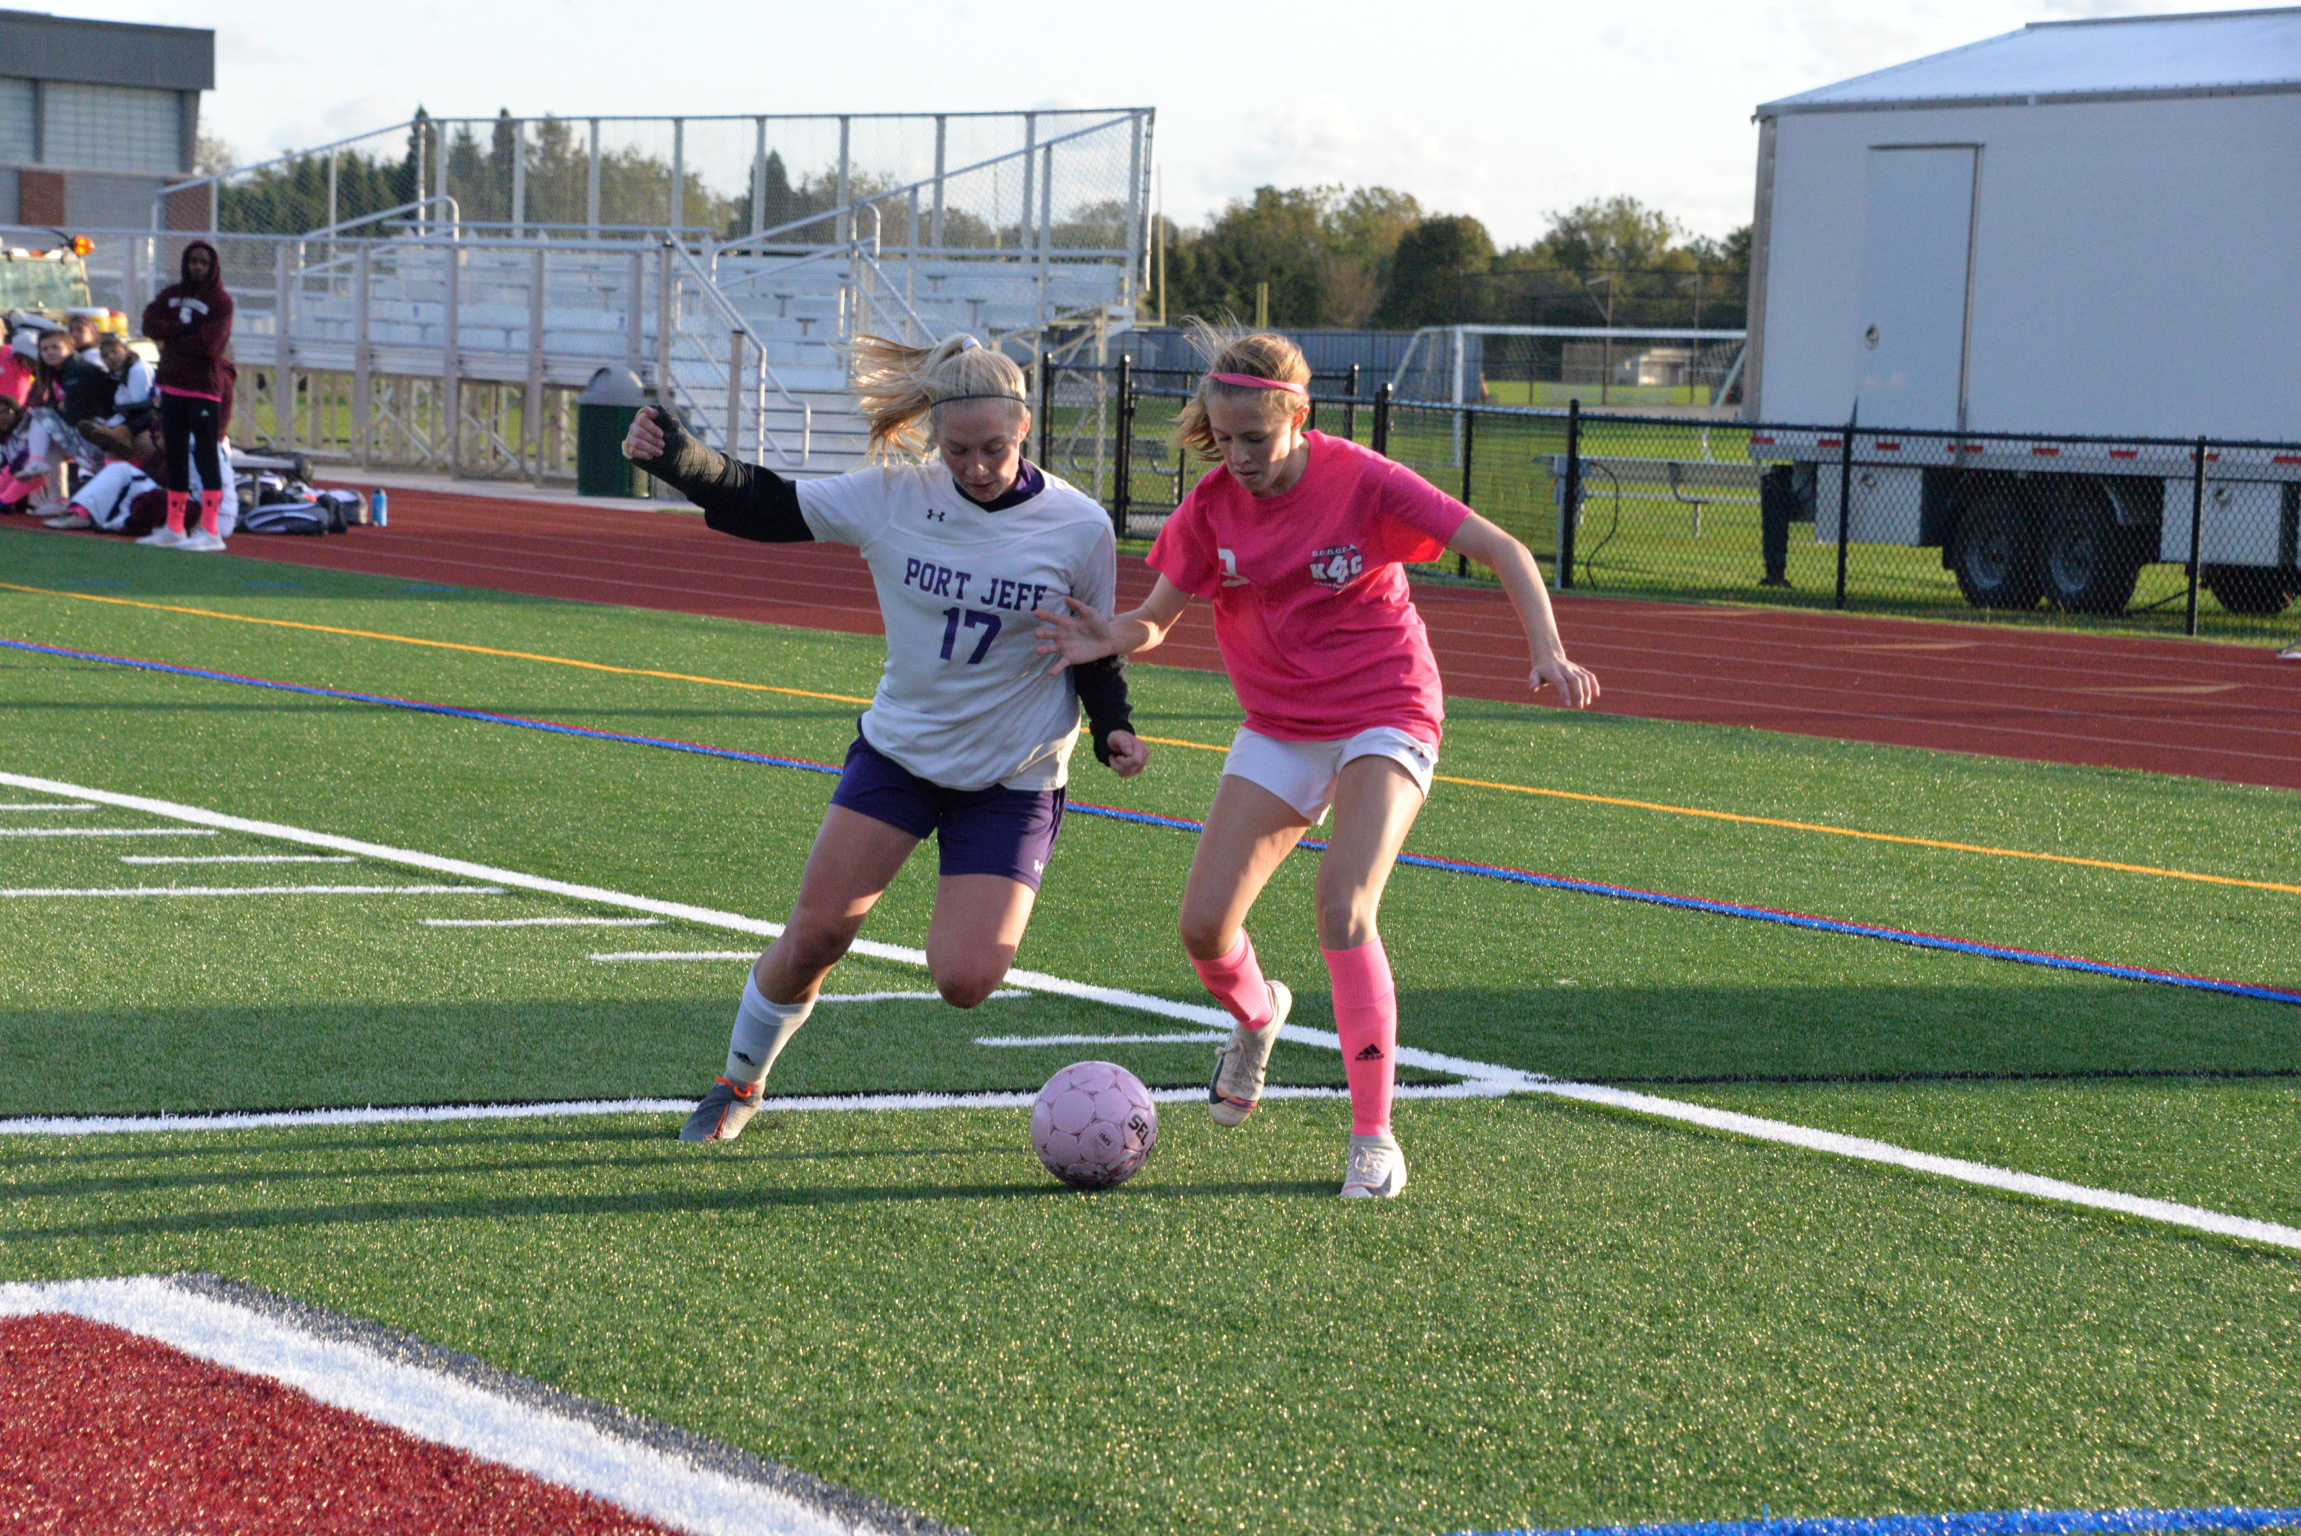 Southampton's Taylor Zukosky and a Port Jeff player battle for the ball. Zukosky scored a goal in the Lady Mariner's victory last week.